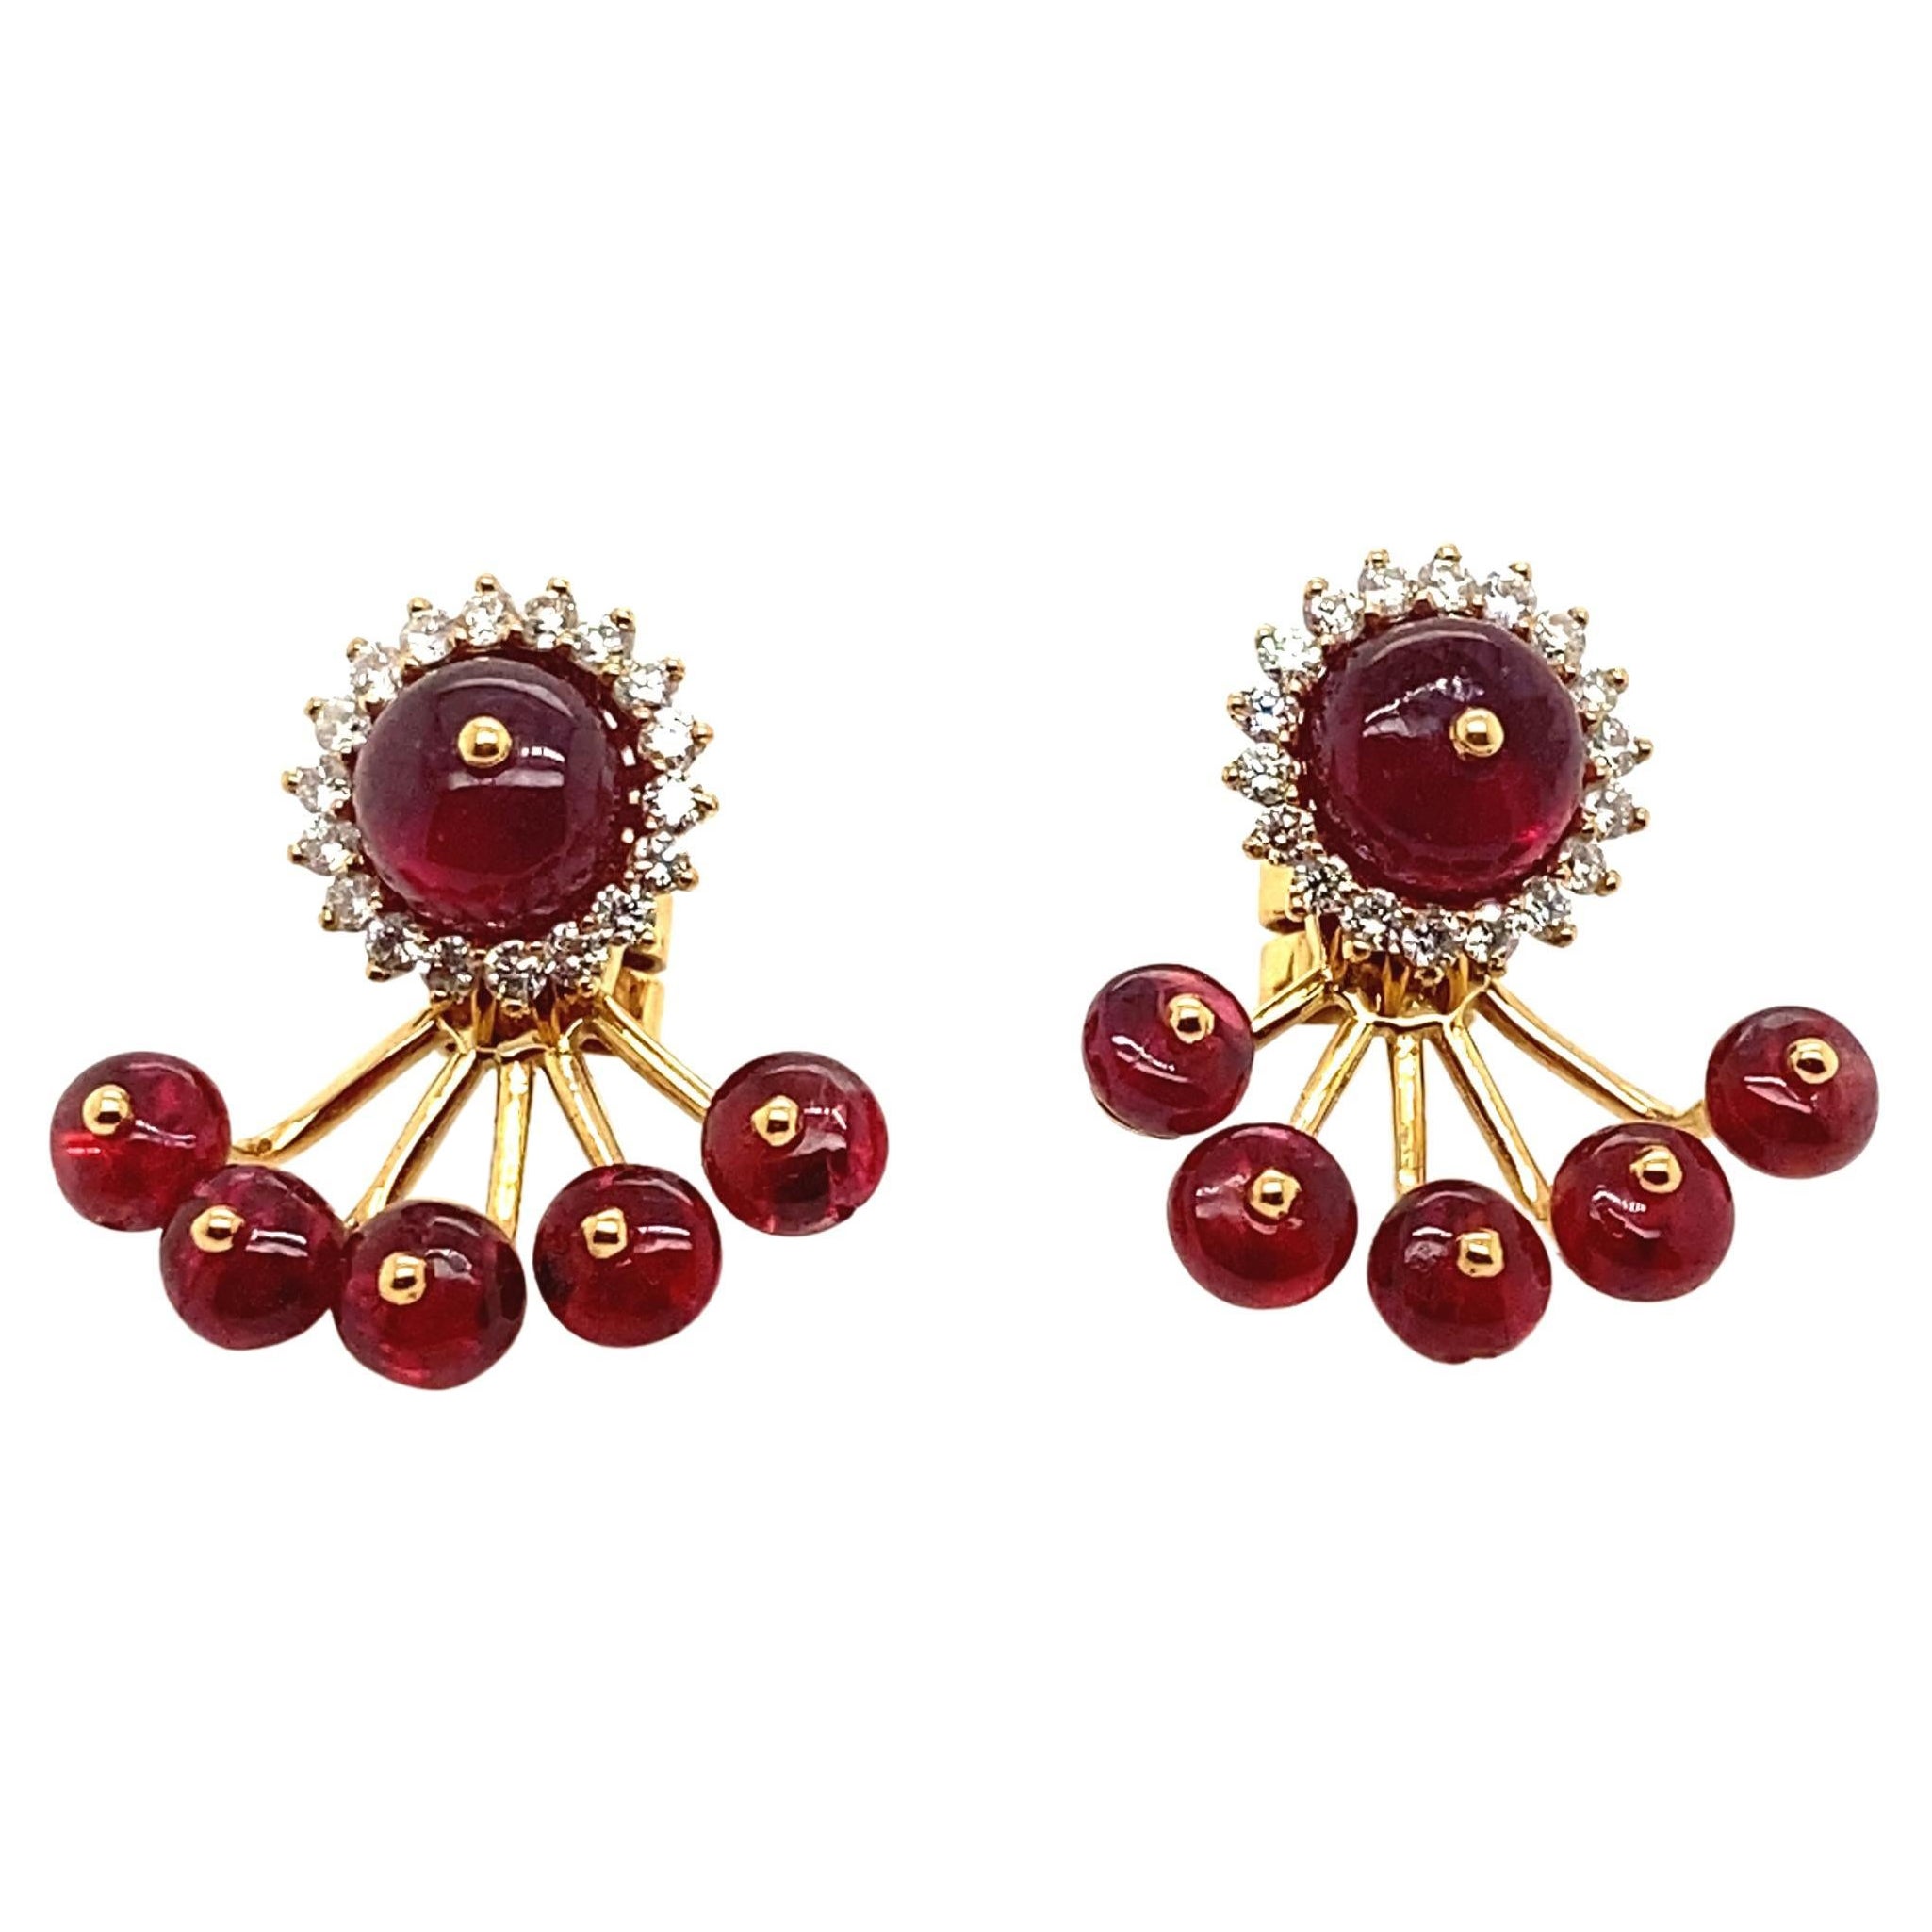 12.98 Carat Natural Red Spinel Beads and Diamond Gold Earrings